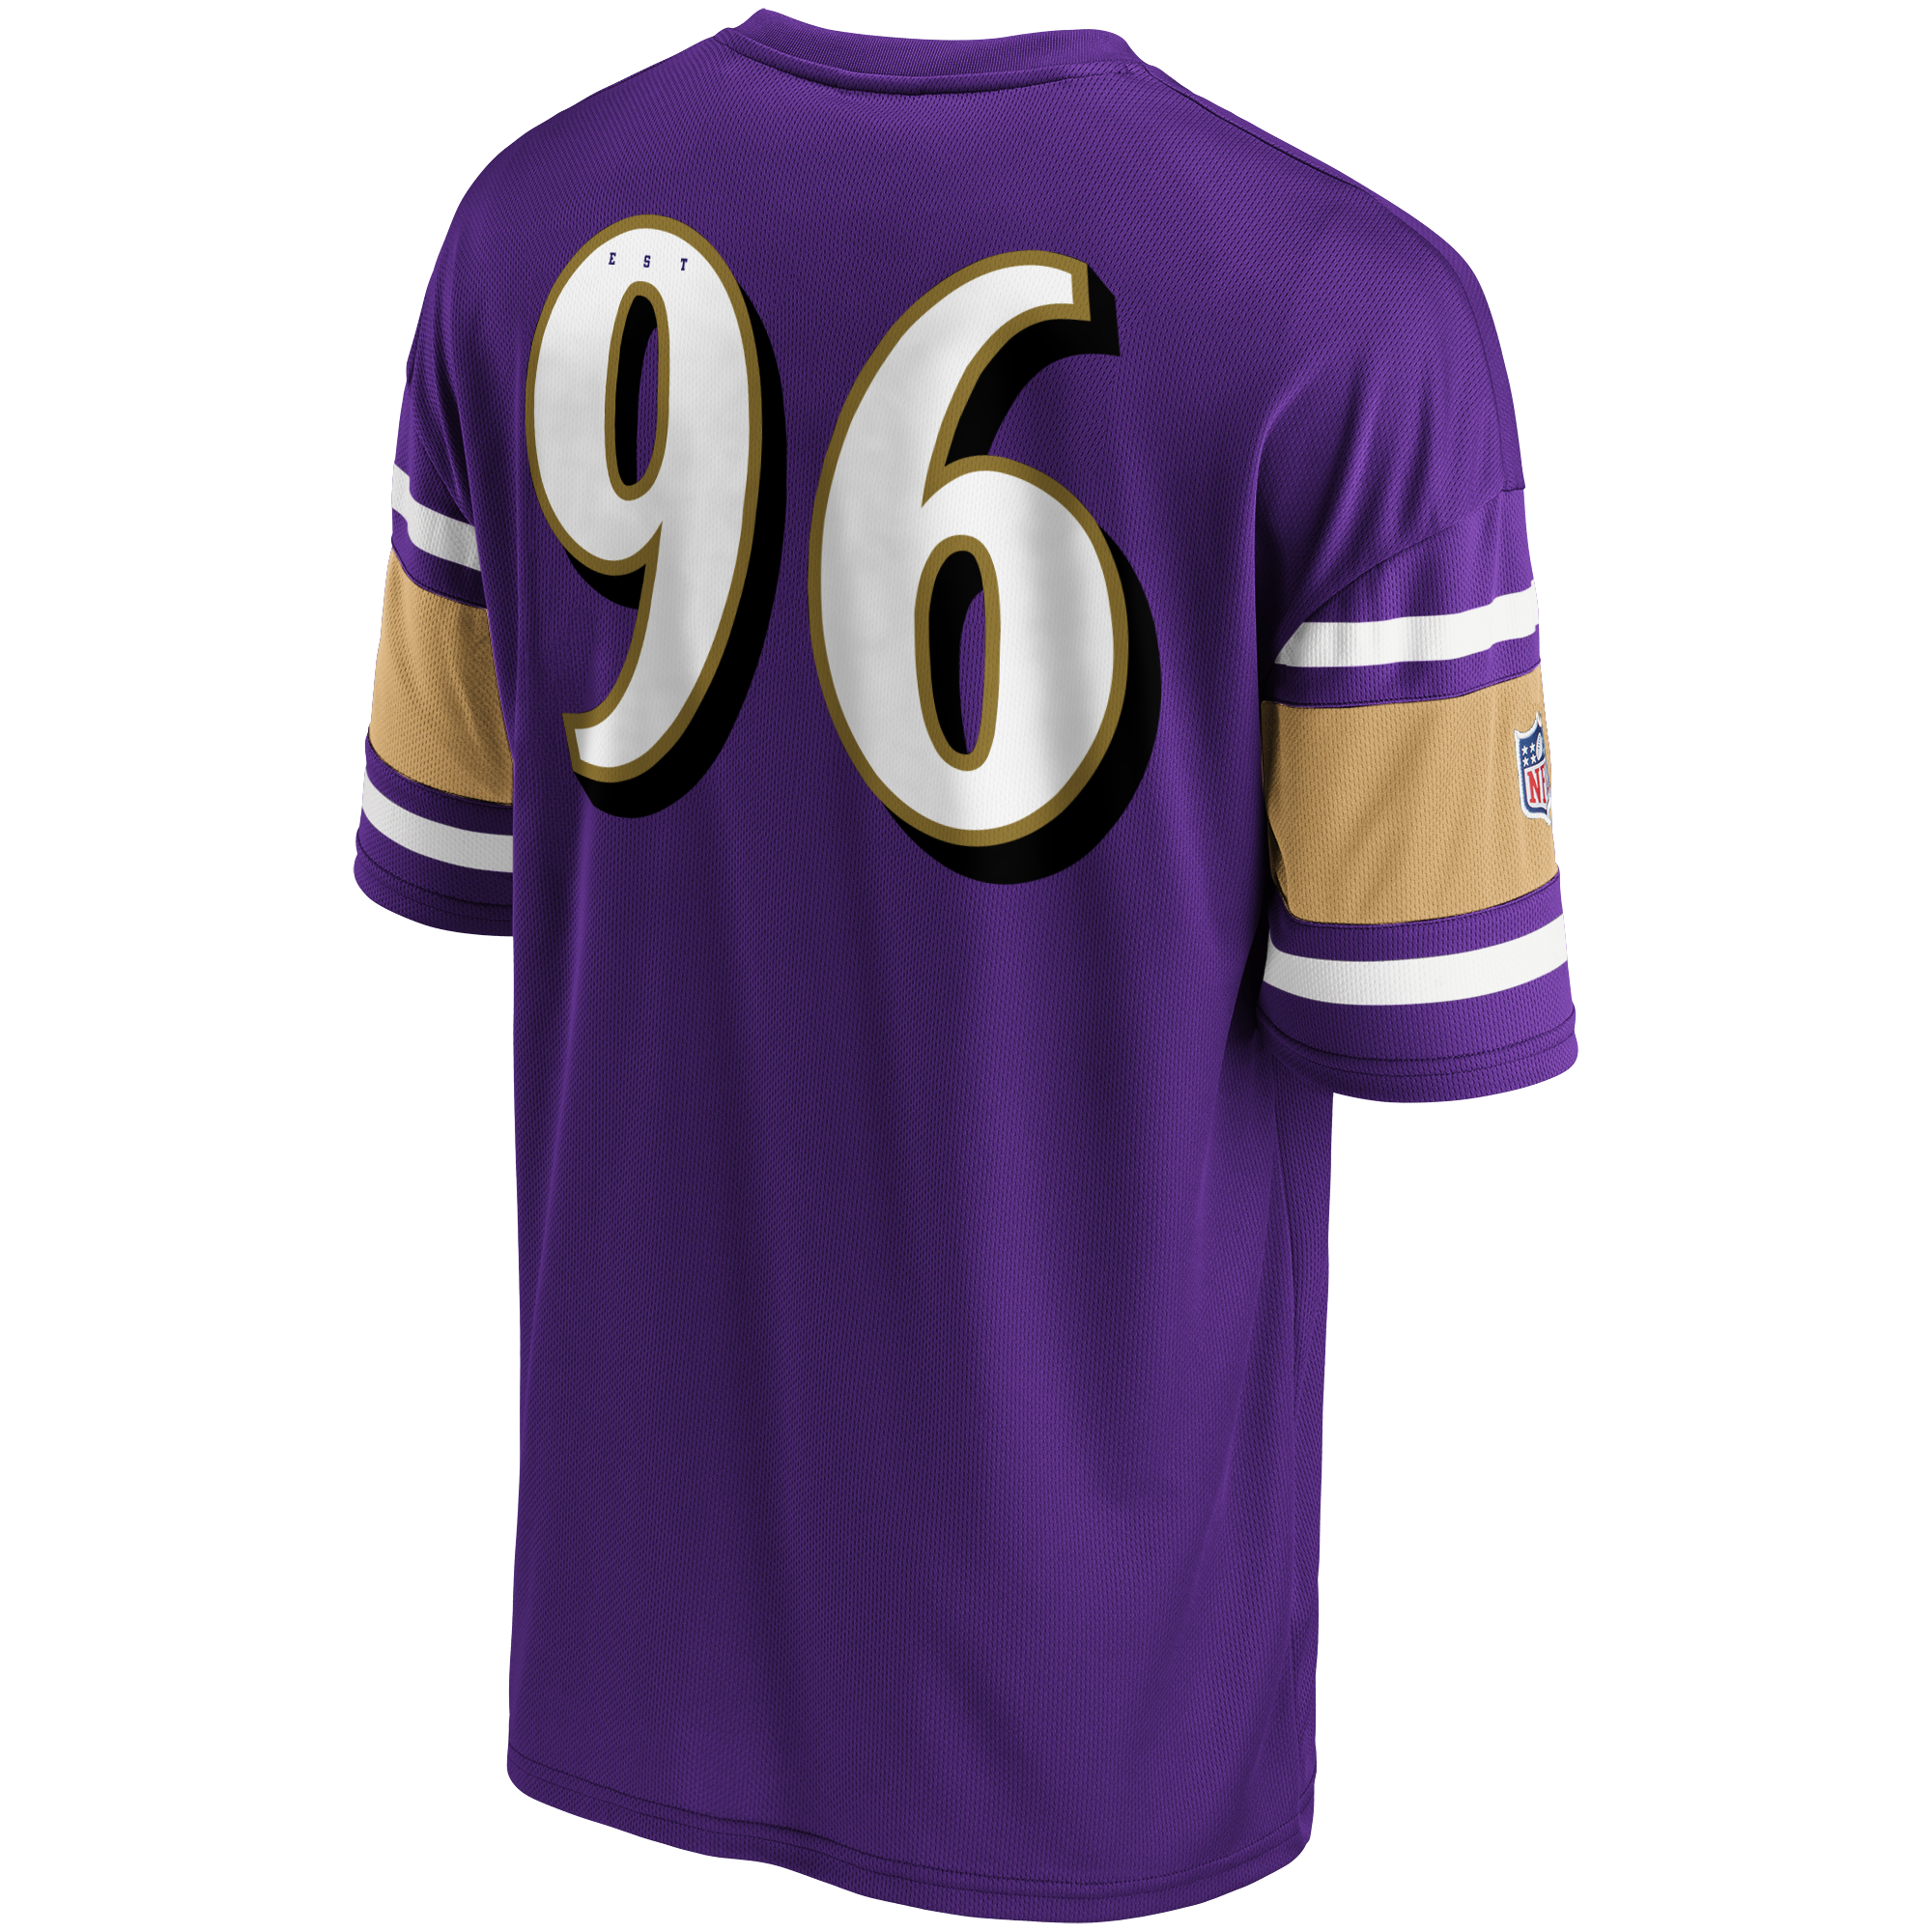 Baltimore Ravens Foundation Supporters Jersey